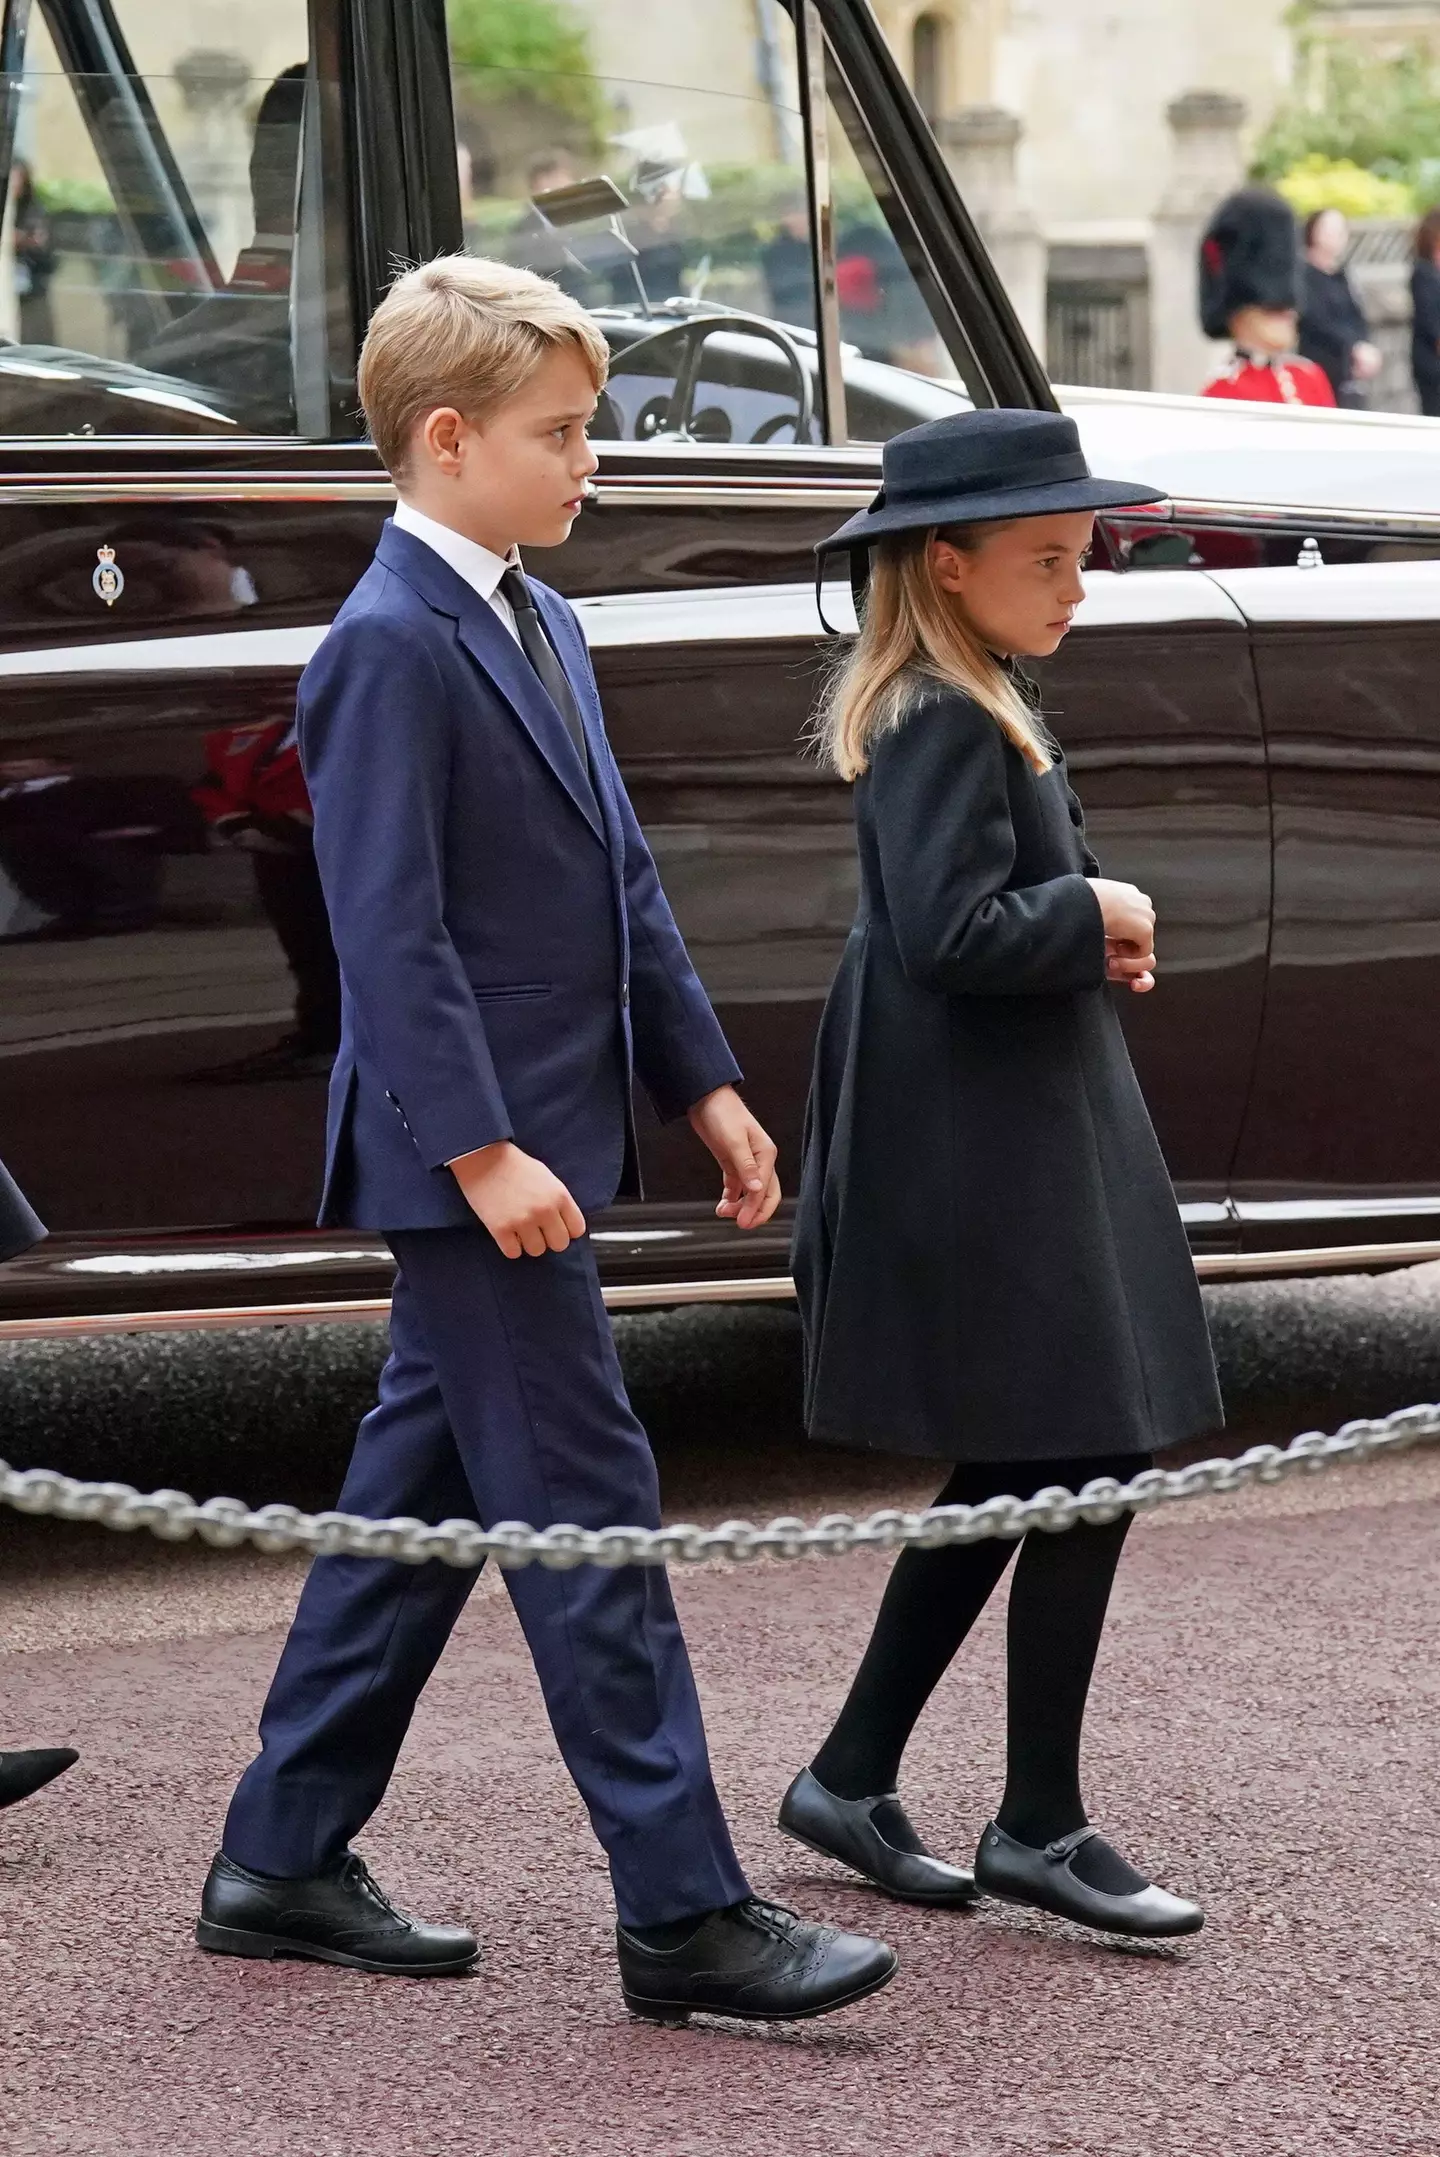 Prince George and Princess Charlotte arrive at committal service for Queen Elizabeth II.